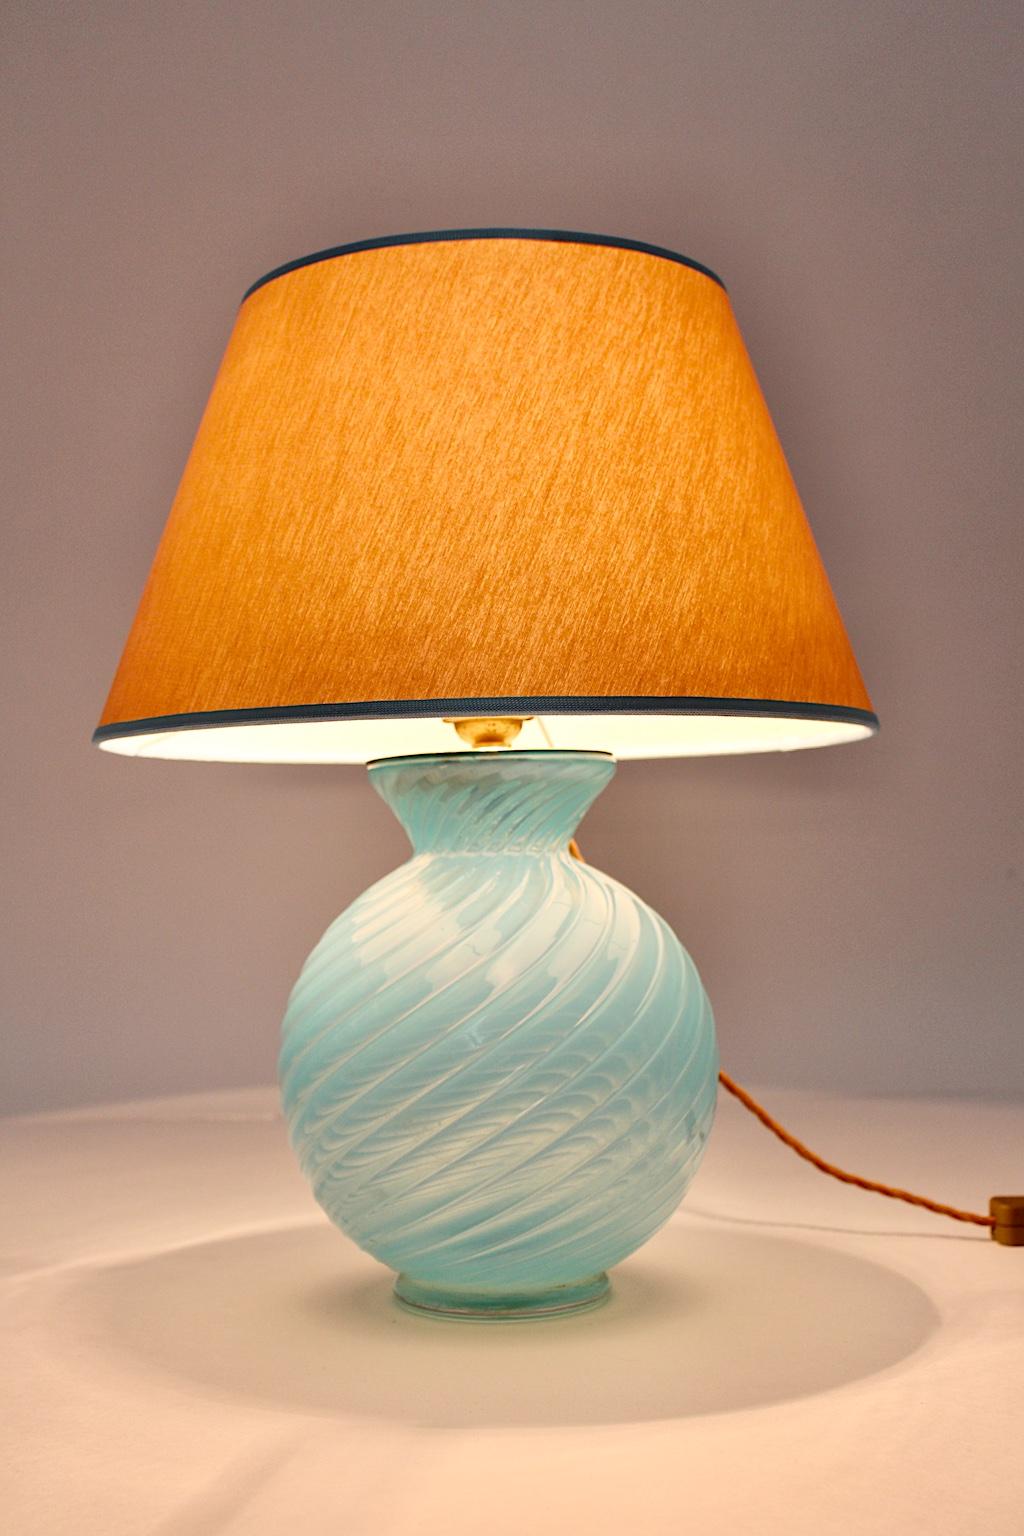 Italian Mid-Century Modern Blue Gold Vintage Glass Table Lamp Barovier & Toso Italy 1950 For Sale